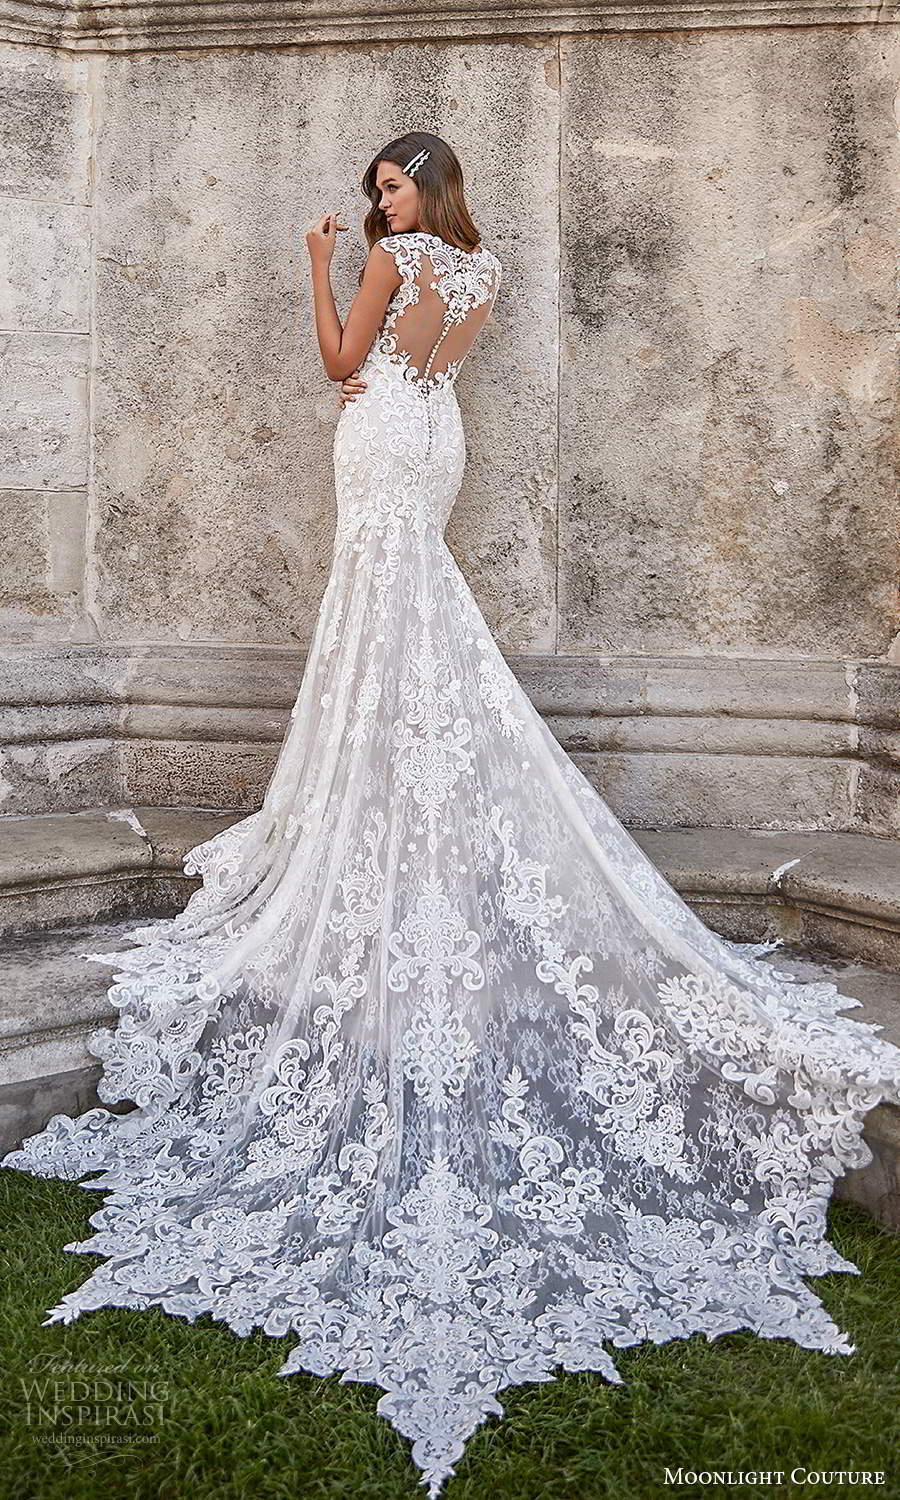 moonlight couture spring 2021 bridal sleeveless thick straps plunging sweetheart neckline fully embellished lace trumpet sheath mermaid wedding dress cathedral train illusion back (9) bv